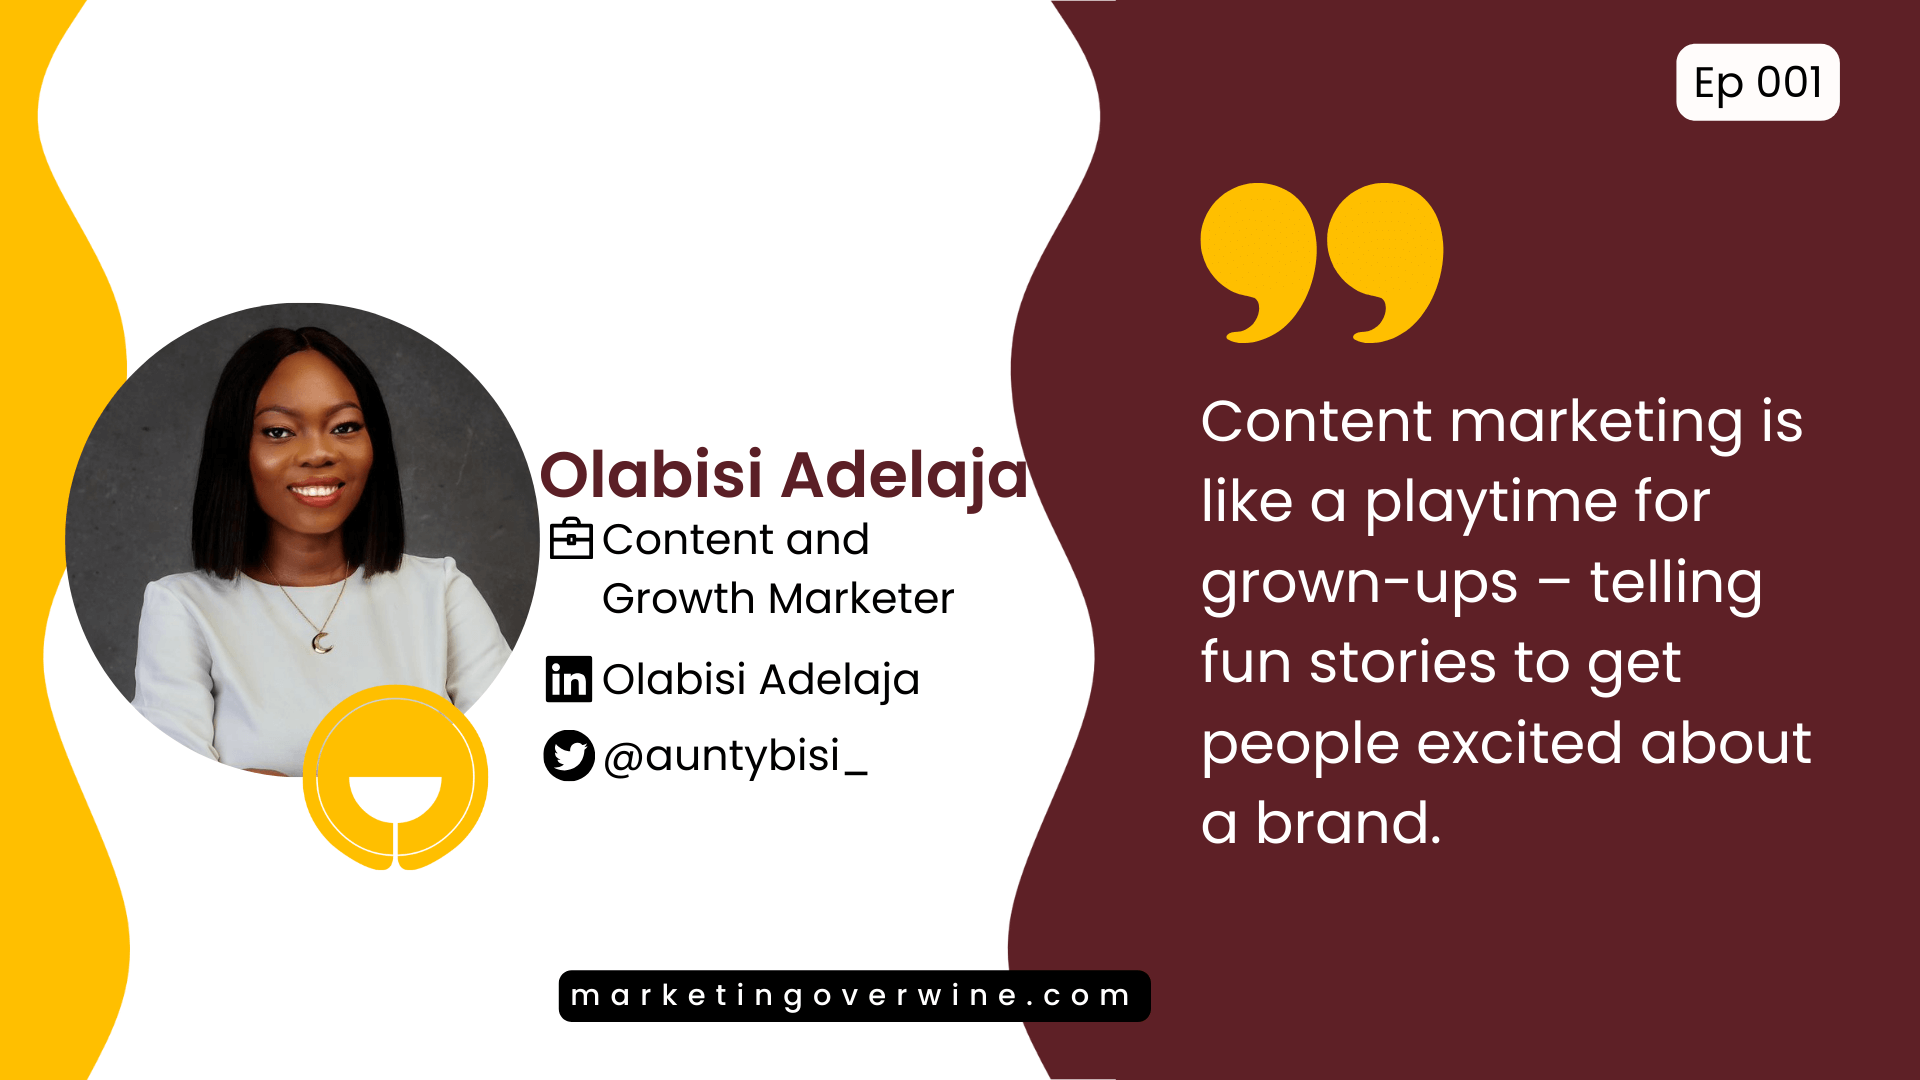 Content marketing is like a playtime for grown-ups - Olabisi Adelaja